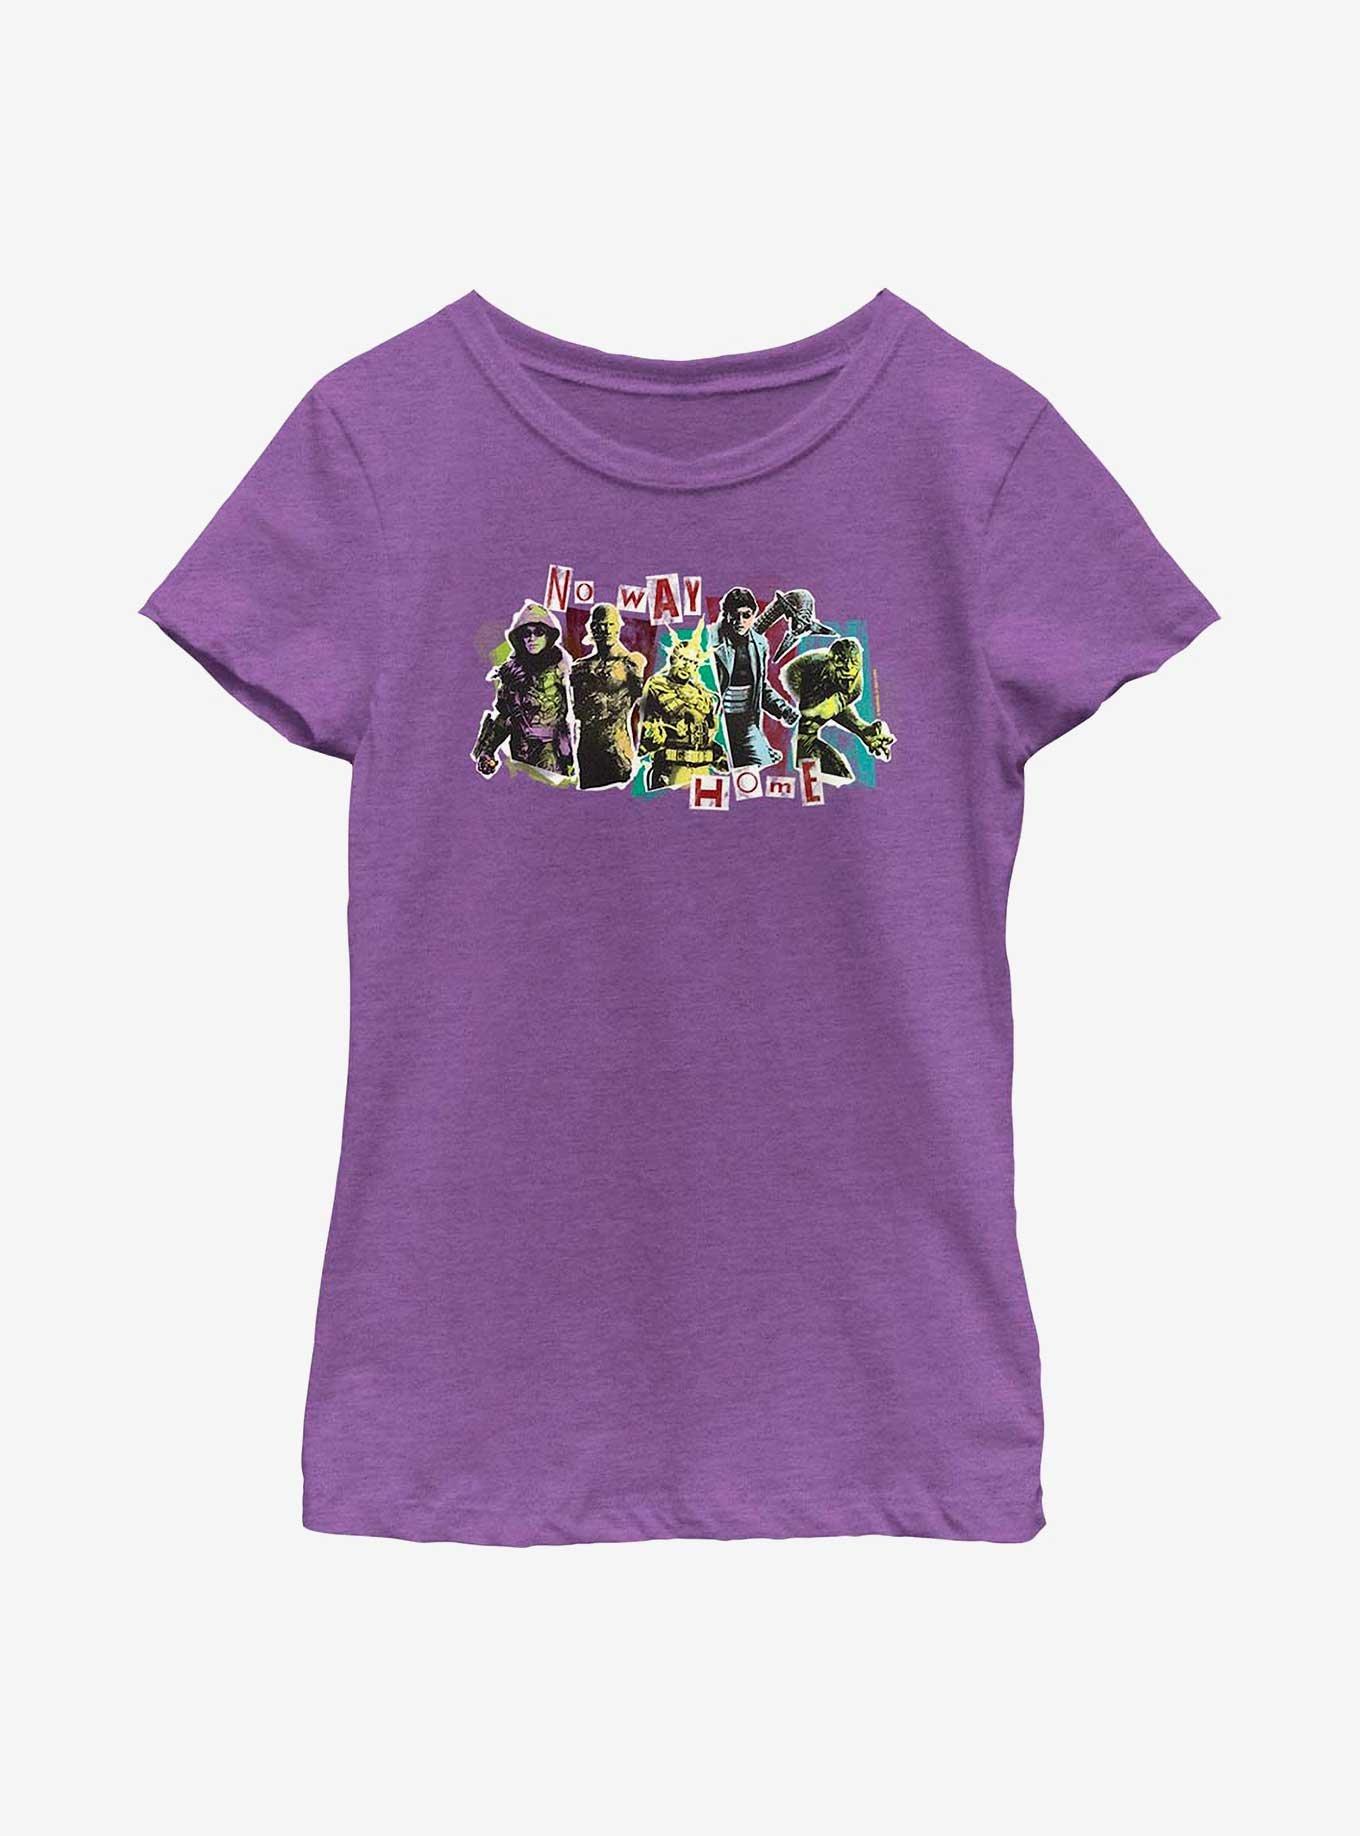 Marvel Spider-Man No Way Home Villains Panel Youth Girls T-Shirt, PURPLE BERRY, hi-res